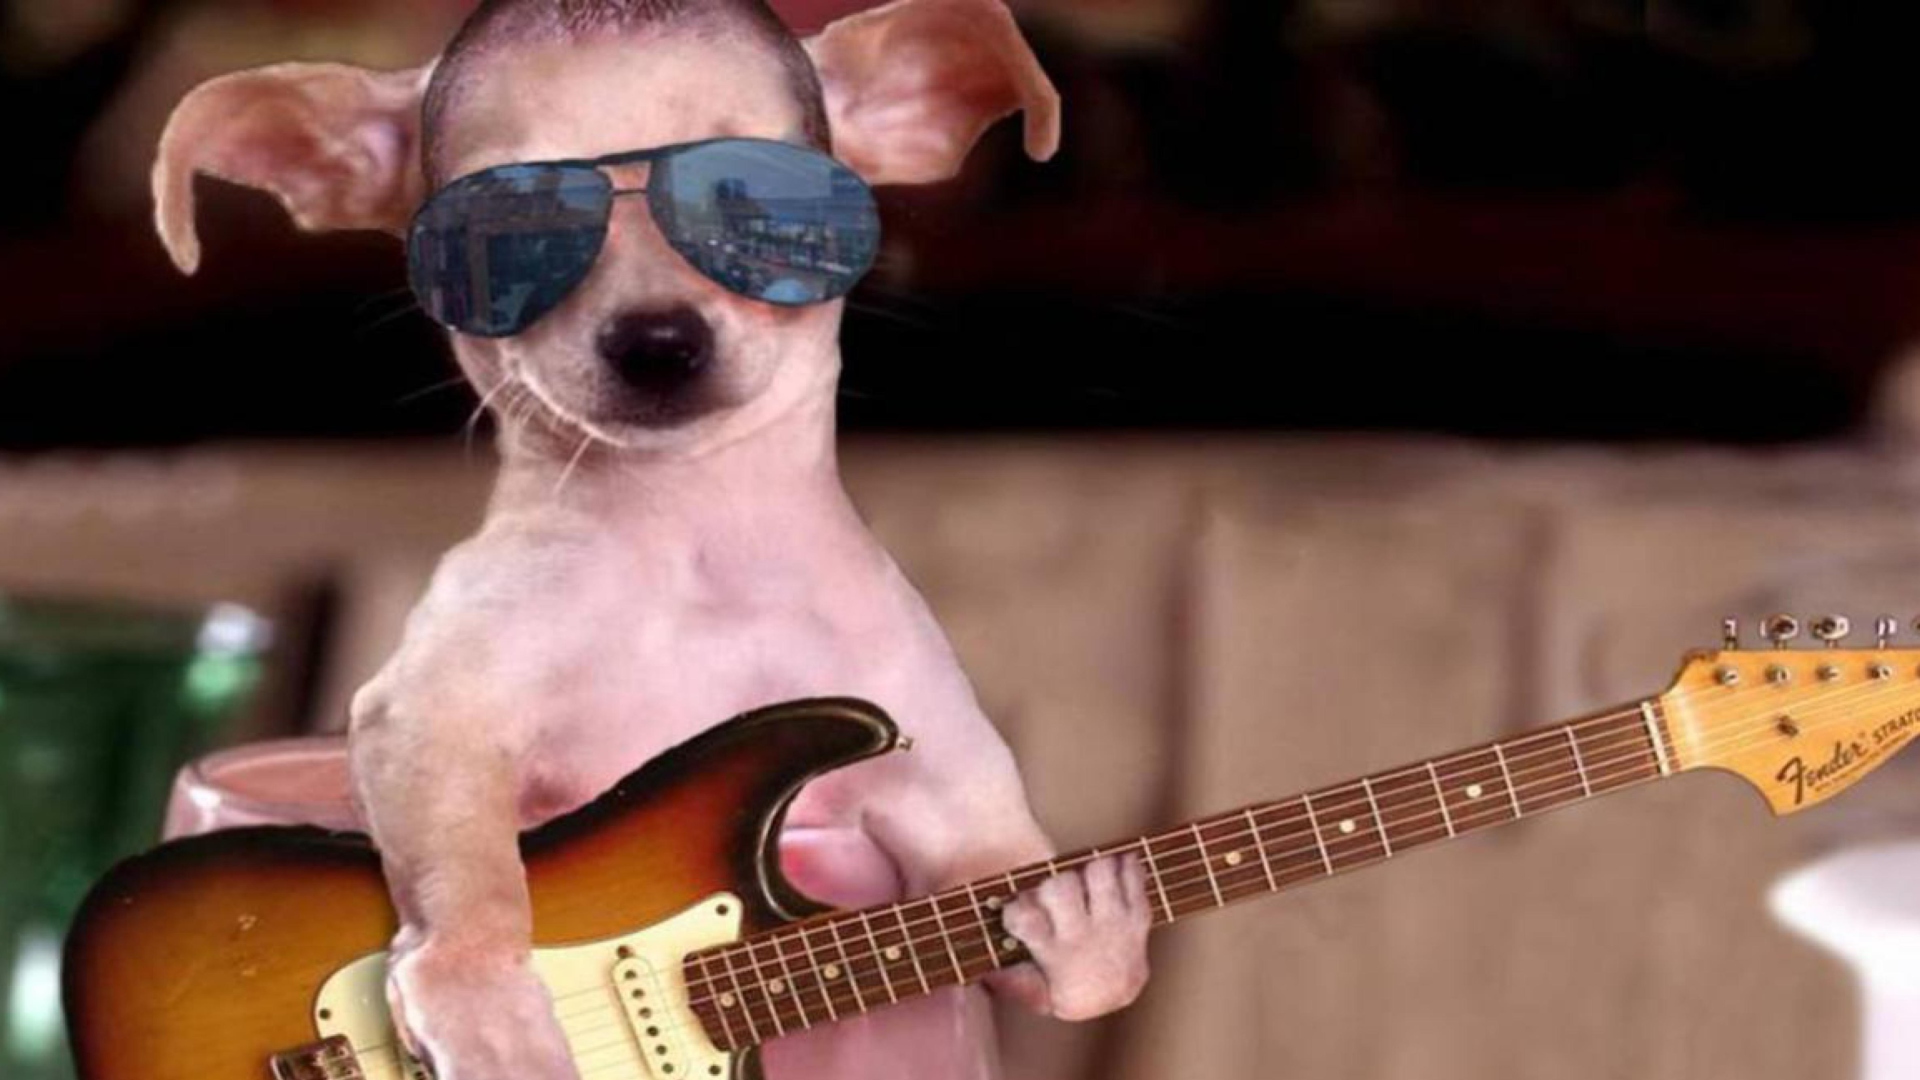 Funny Dog With Guitar wallpaper 1920x1080